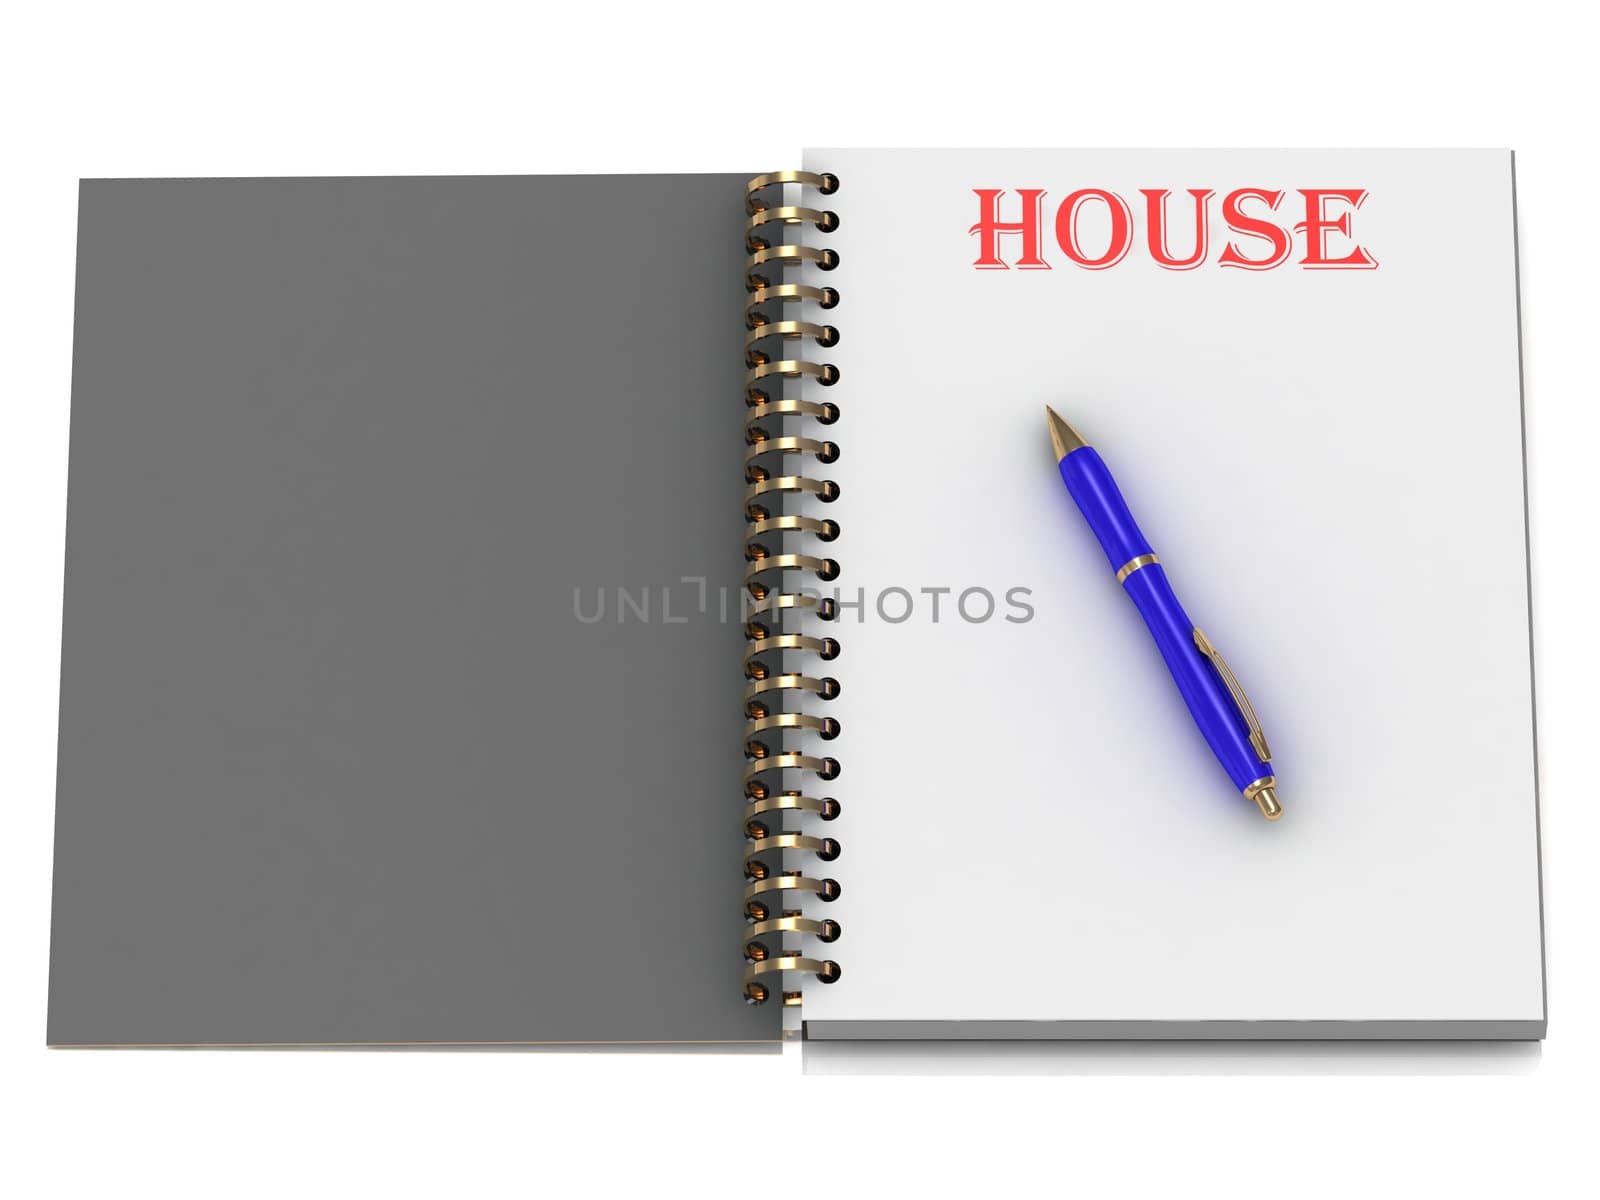 HOUSE word on notebook page and the blue handle. 3D illustration on white background